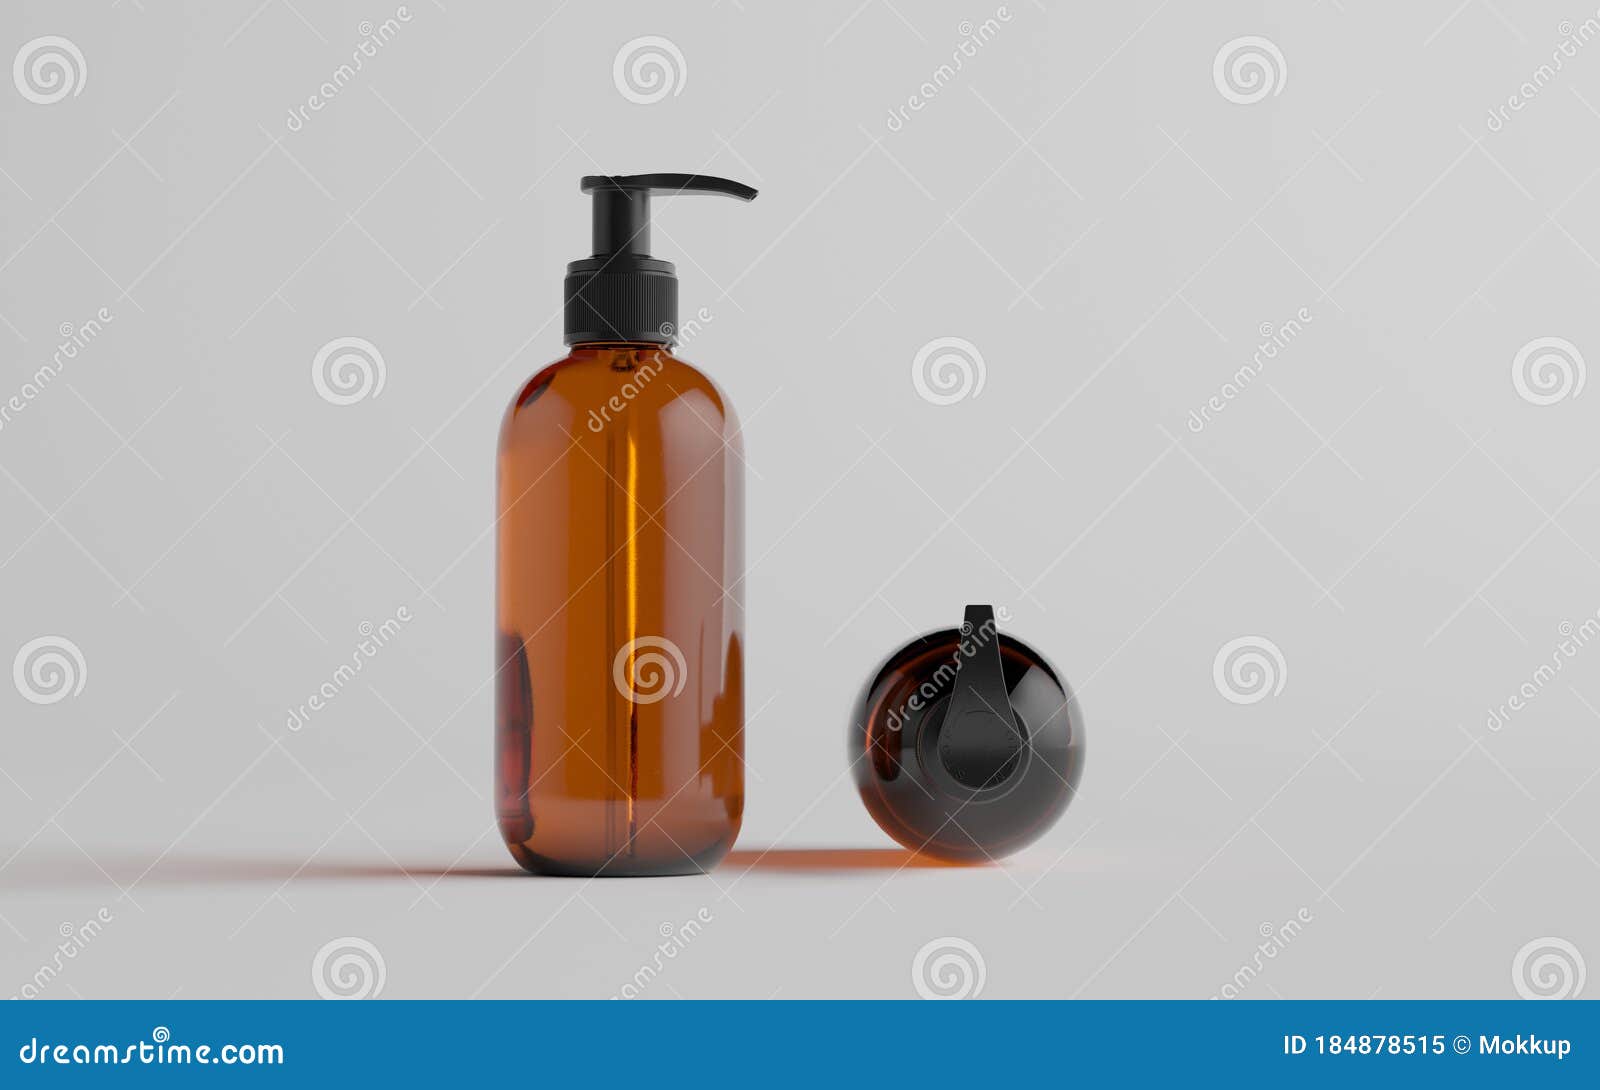 Download Amber Bottles Cosmetic Stock Illustrations 134 Amber Bottles Cosmetic Stock Illustrations Vectors Clipart Dreamstime Yellowimages Mockups